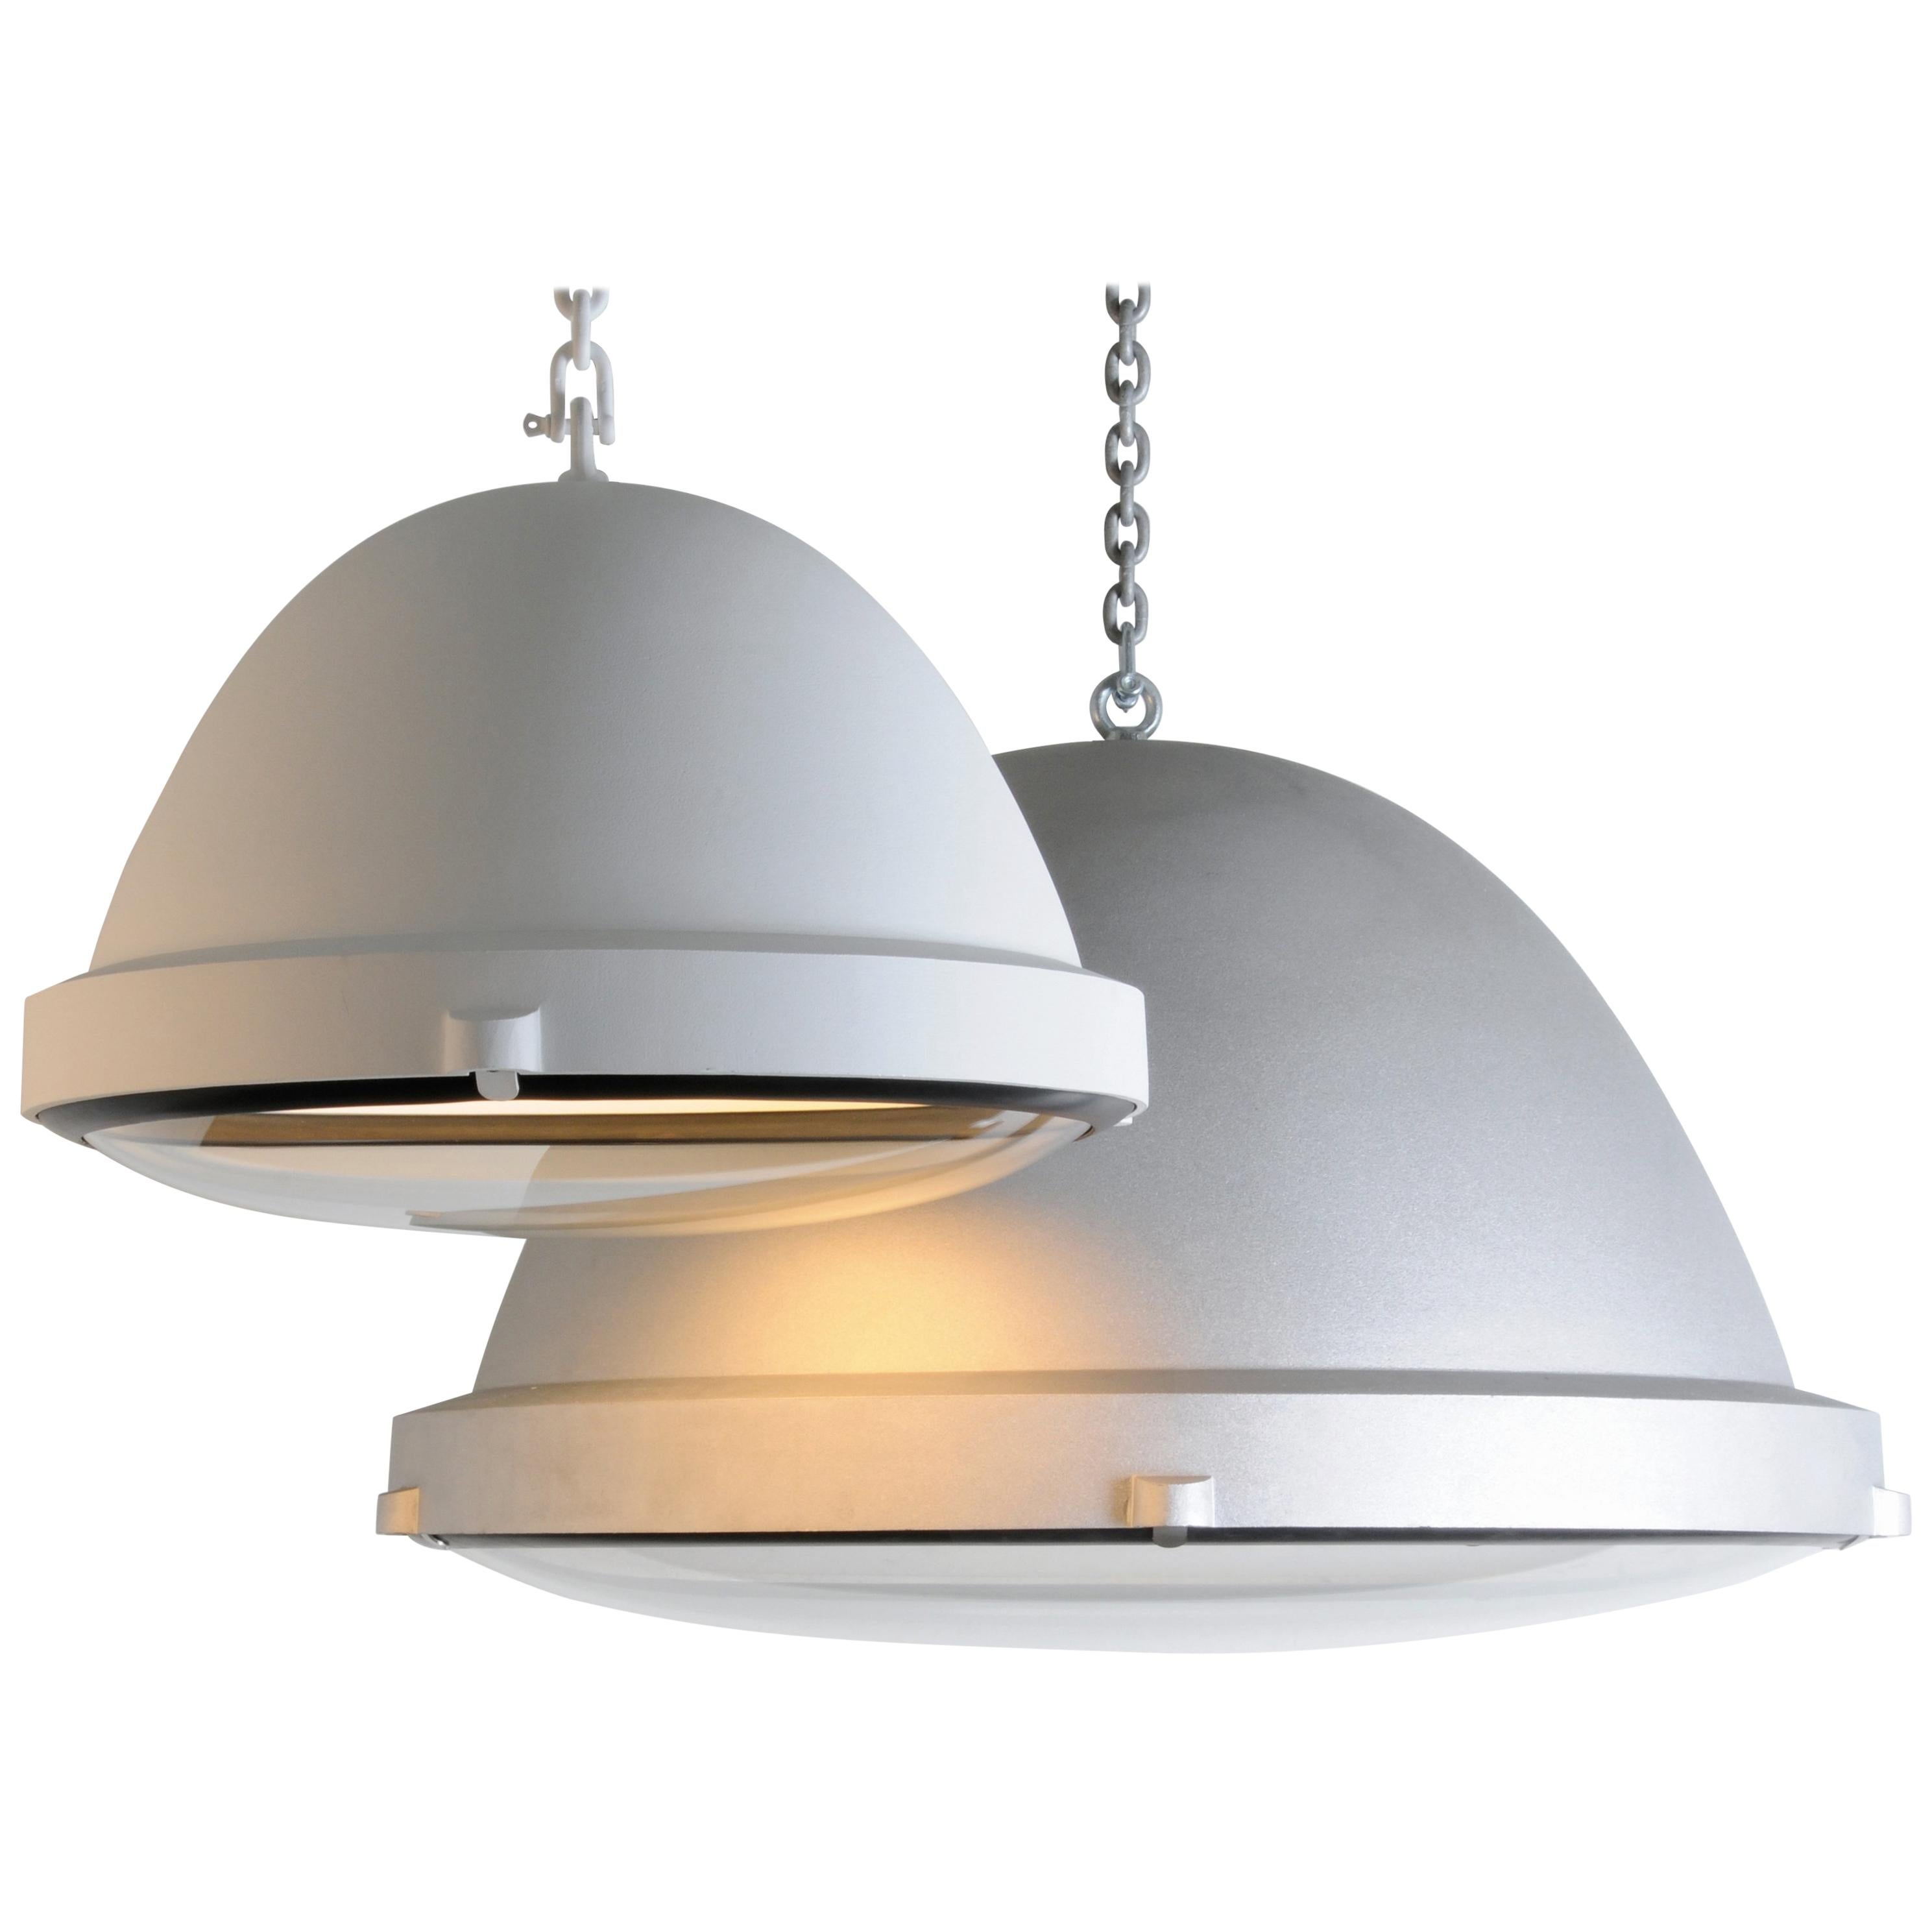 Jacco Maris Outsider Pendant in White Finish For Sale